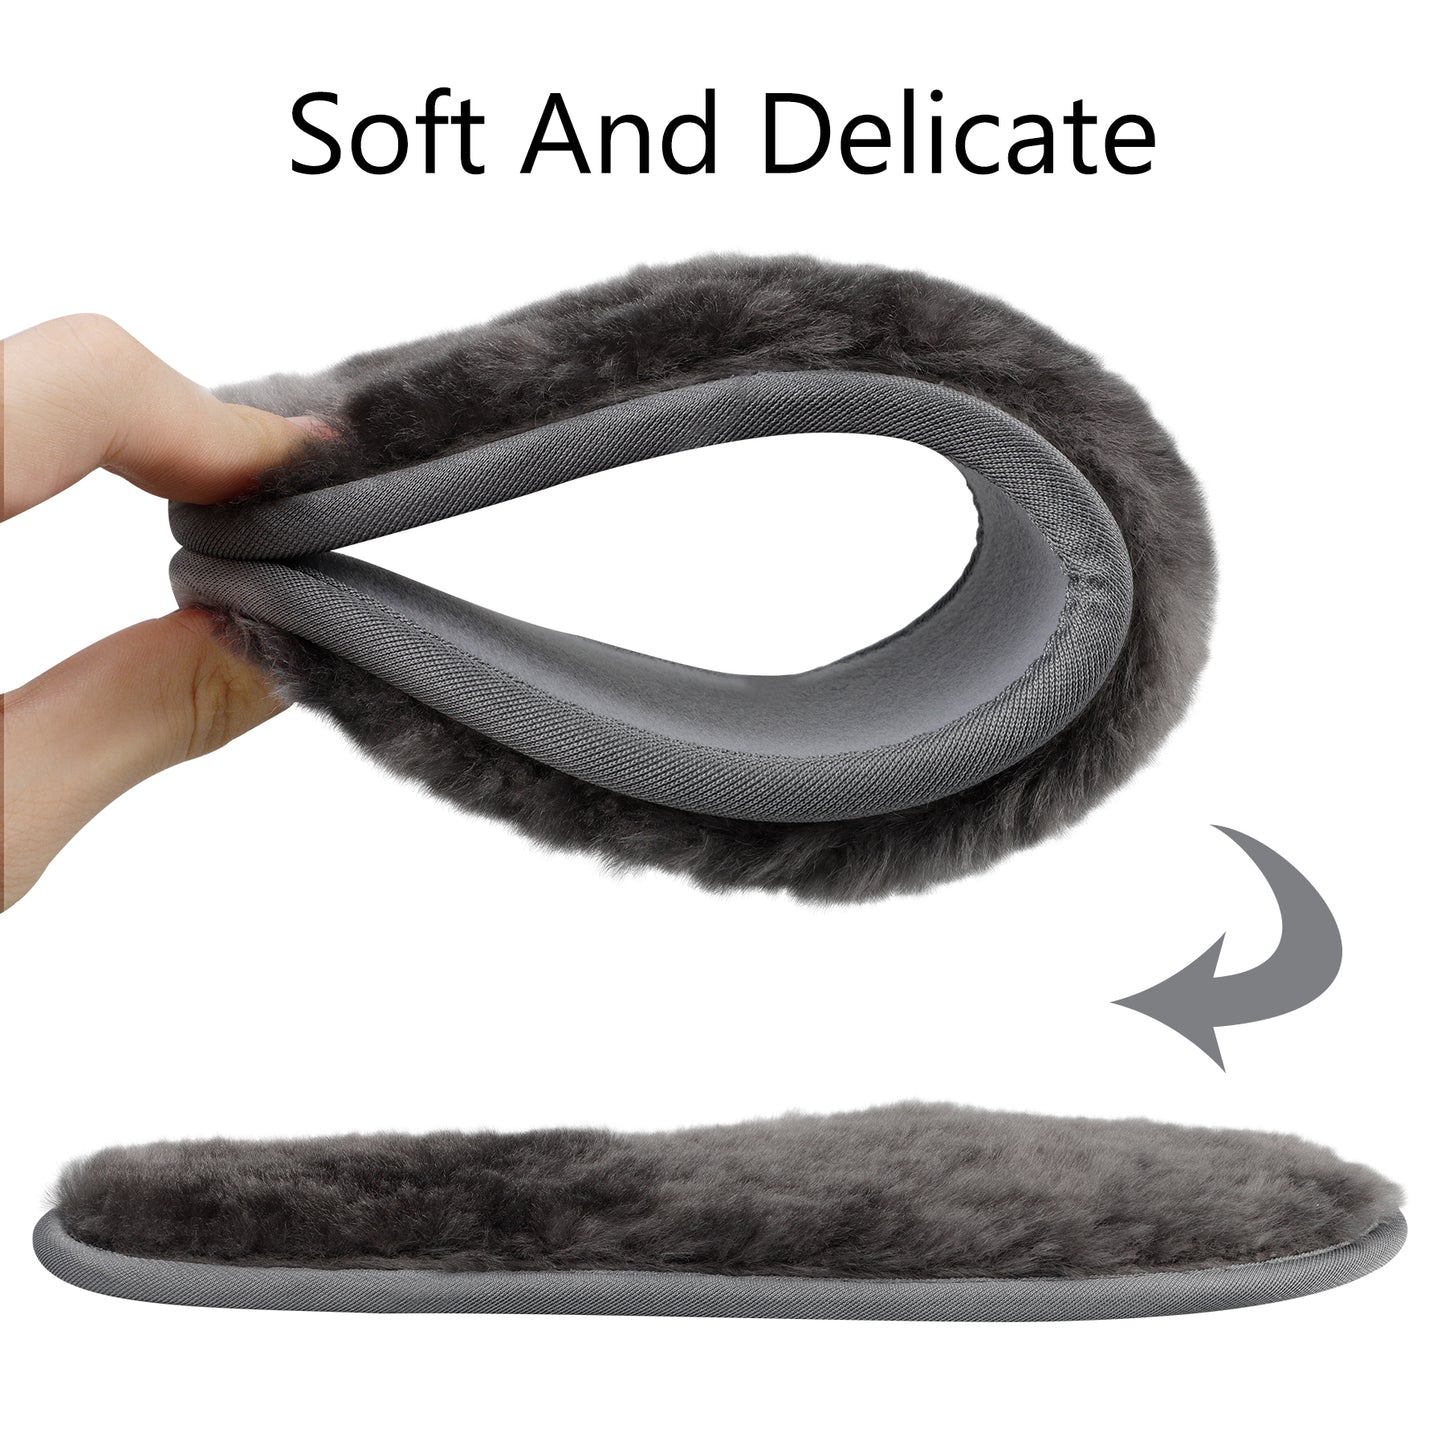 Riemot Sheepskin Insoles for Men Women and Kids, Grey Wide, Super Thick Premium Lambswool Insoles for Wellies Slippers Boots